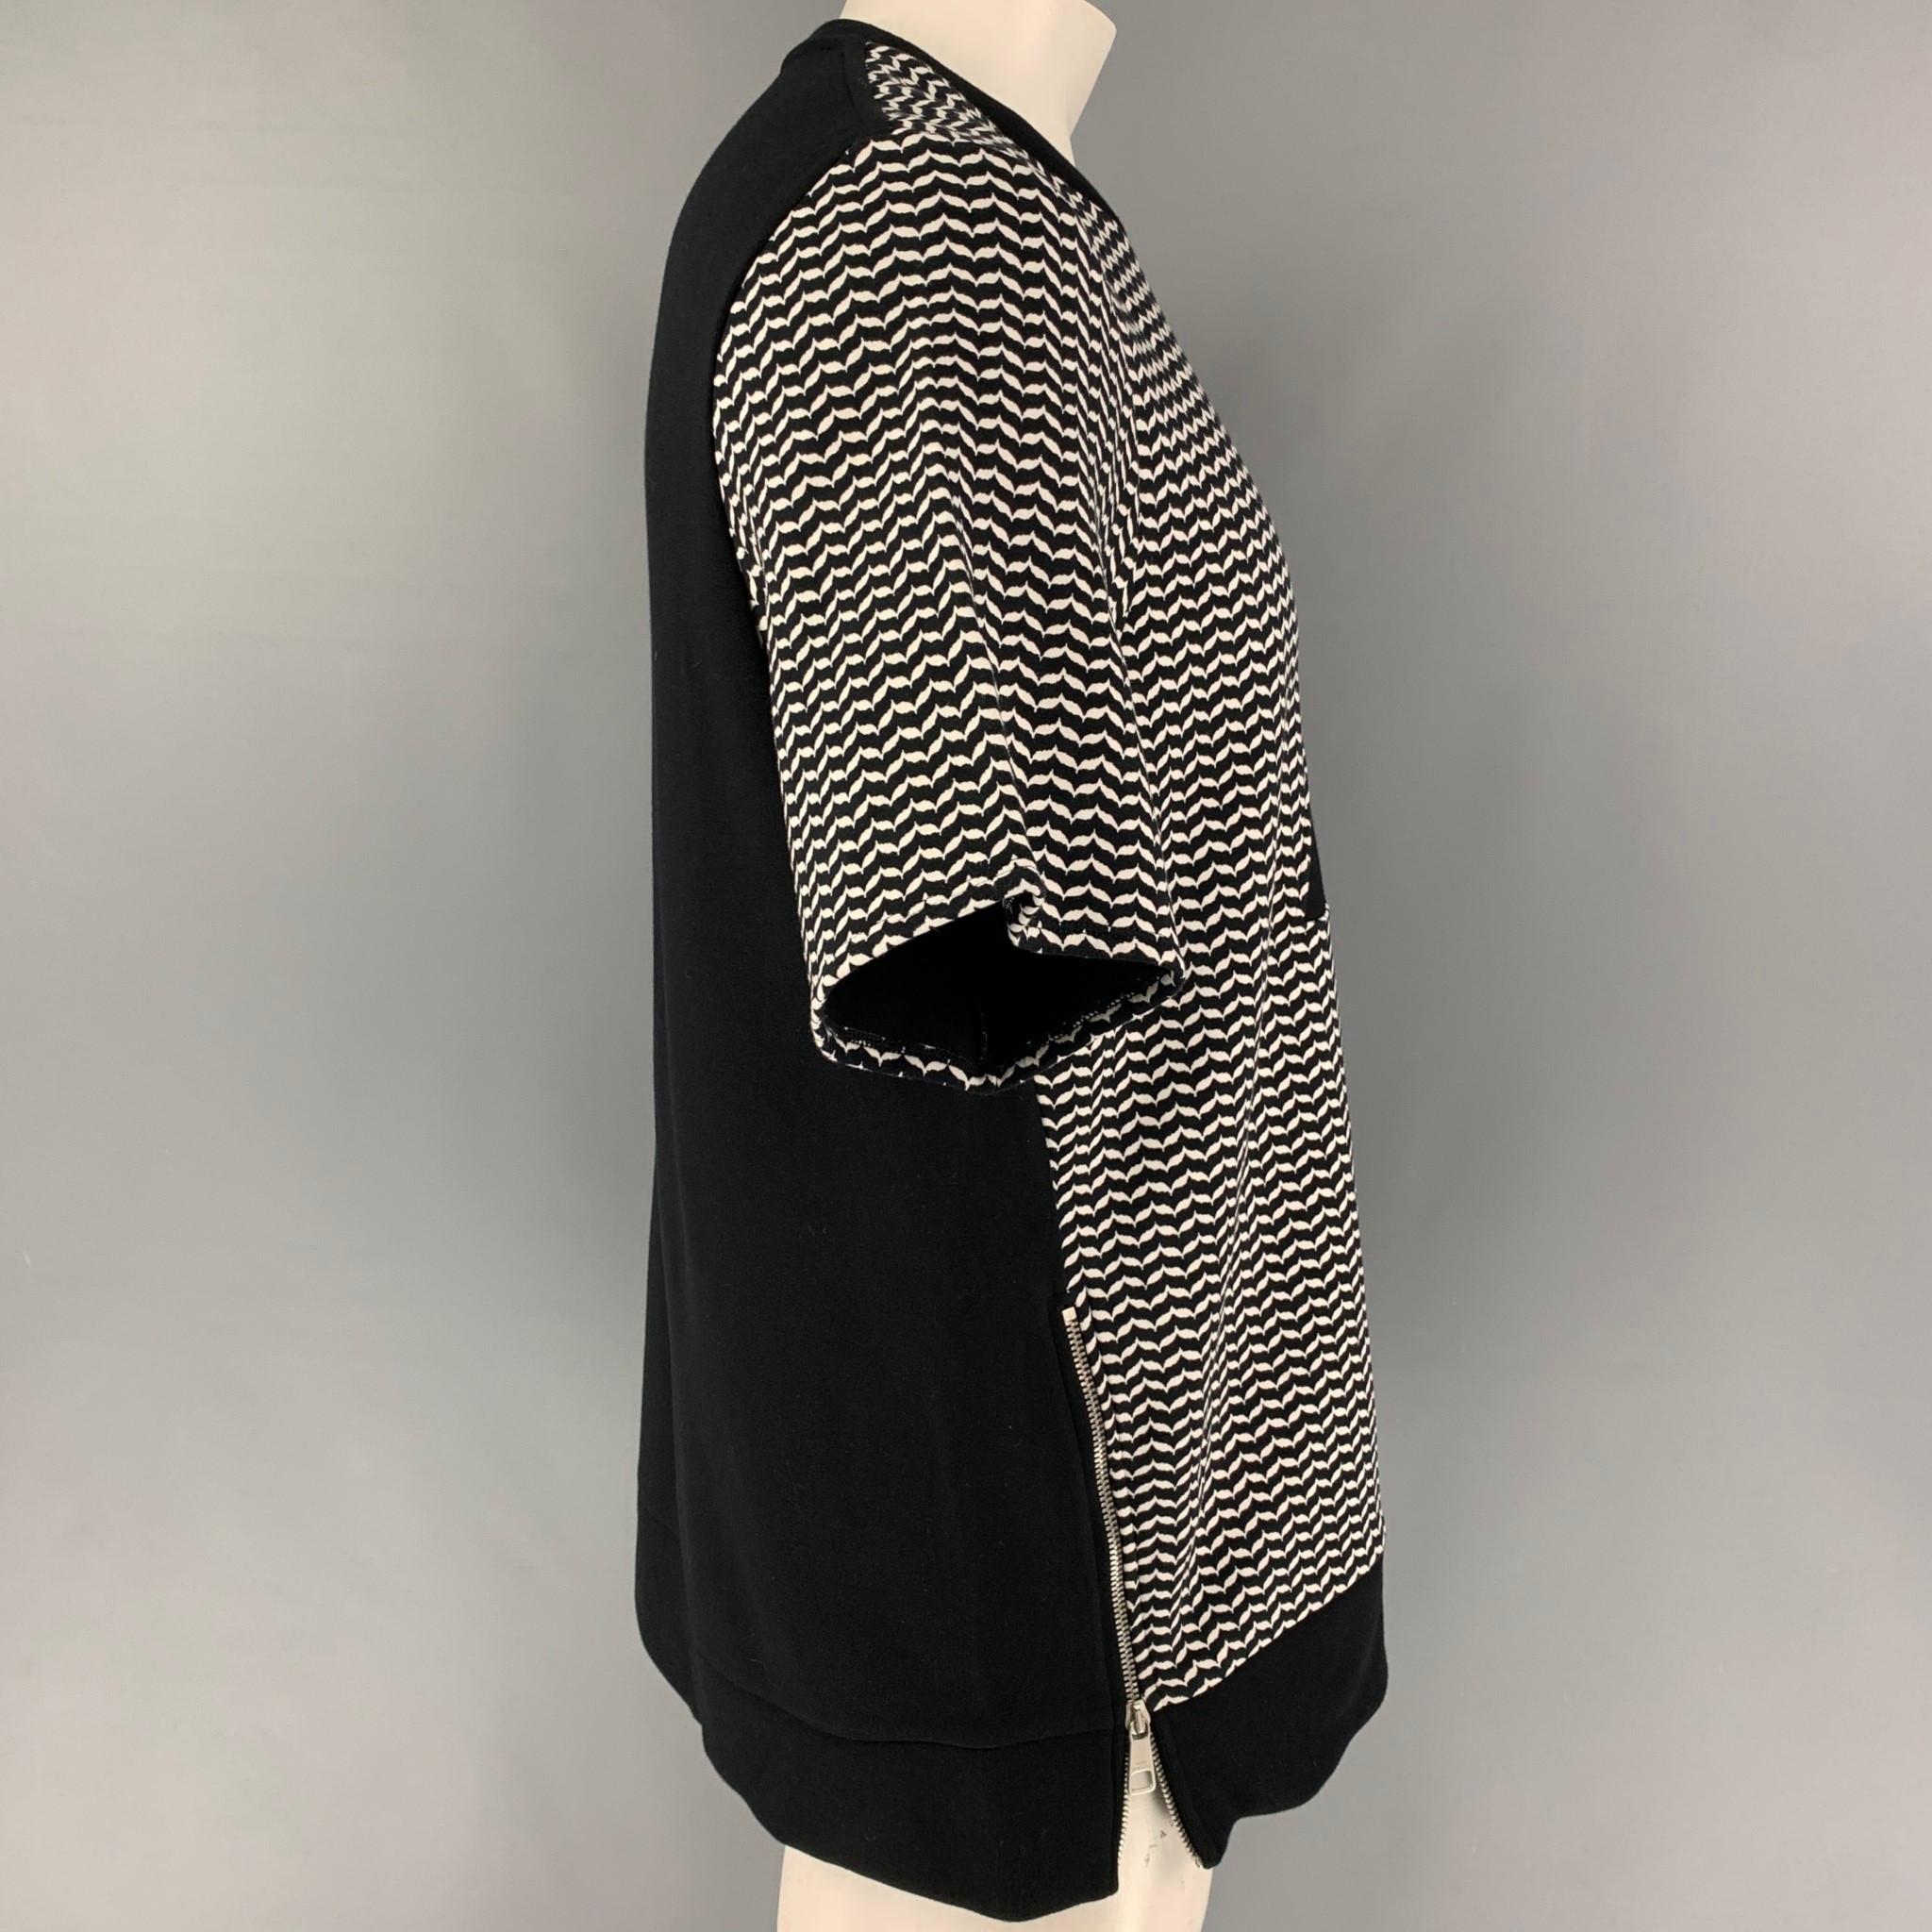 NEIL BARRETT pullover comes in a black & white print lyocell / cotton featuring a slim fit, short sleeves, side zippers, and a crew-neck. Made in Italy. 

New With Tags. 
Marked: XXL
Original Retail Price: $528.00

Measurements:

Shoulder: 18